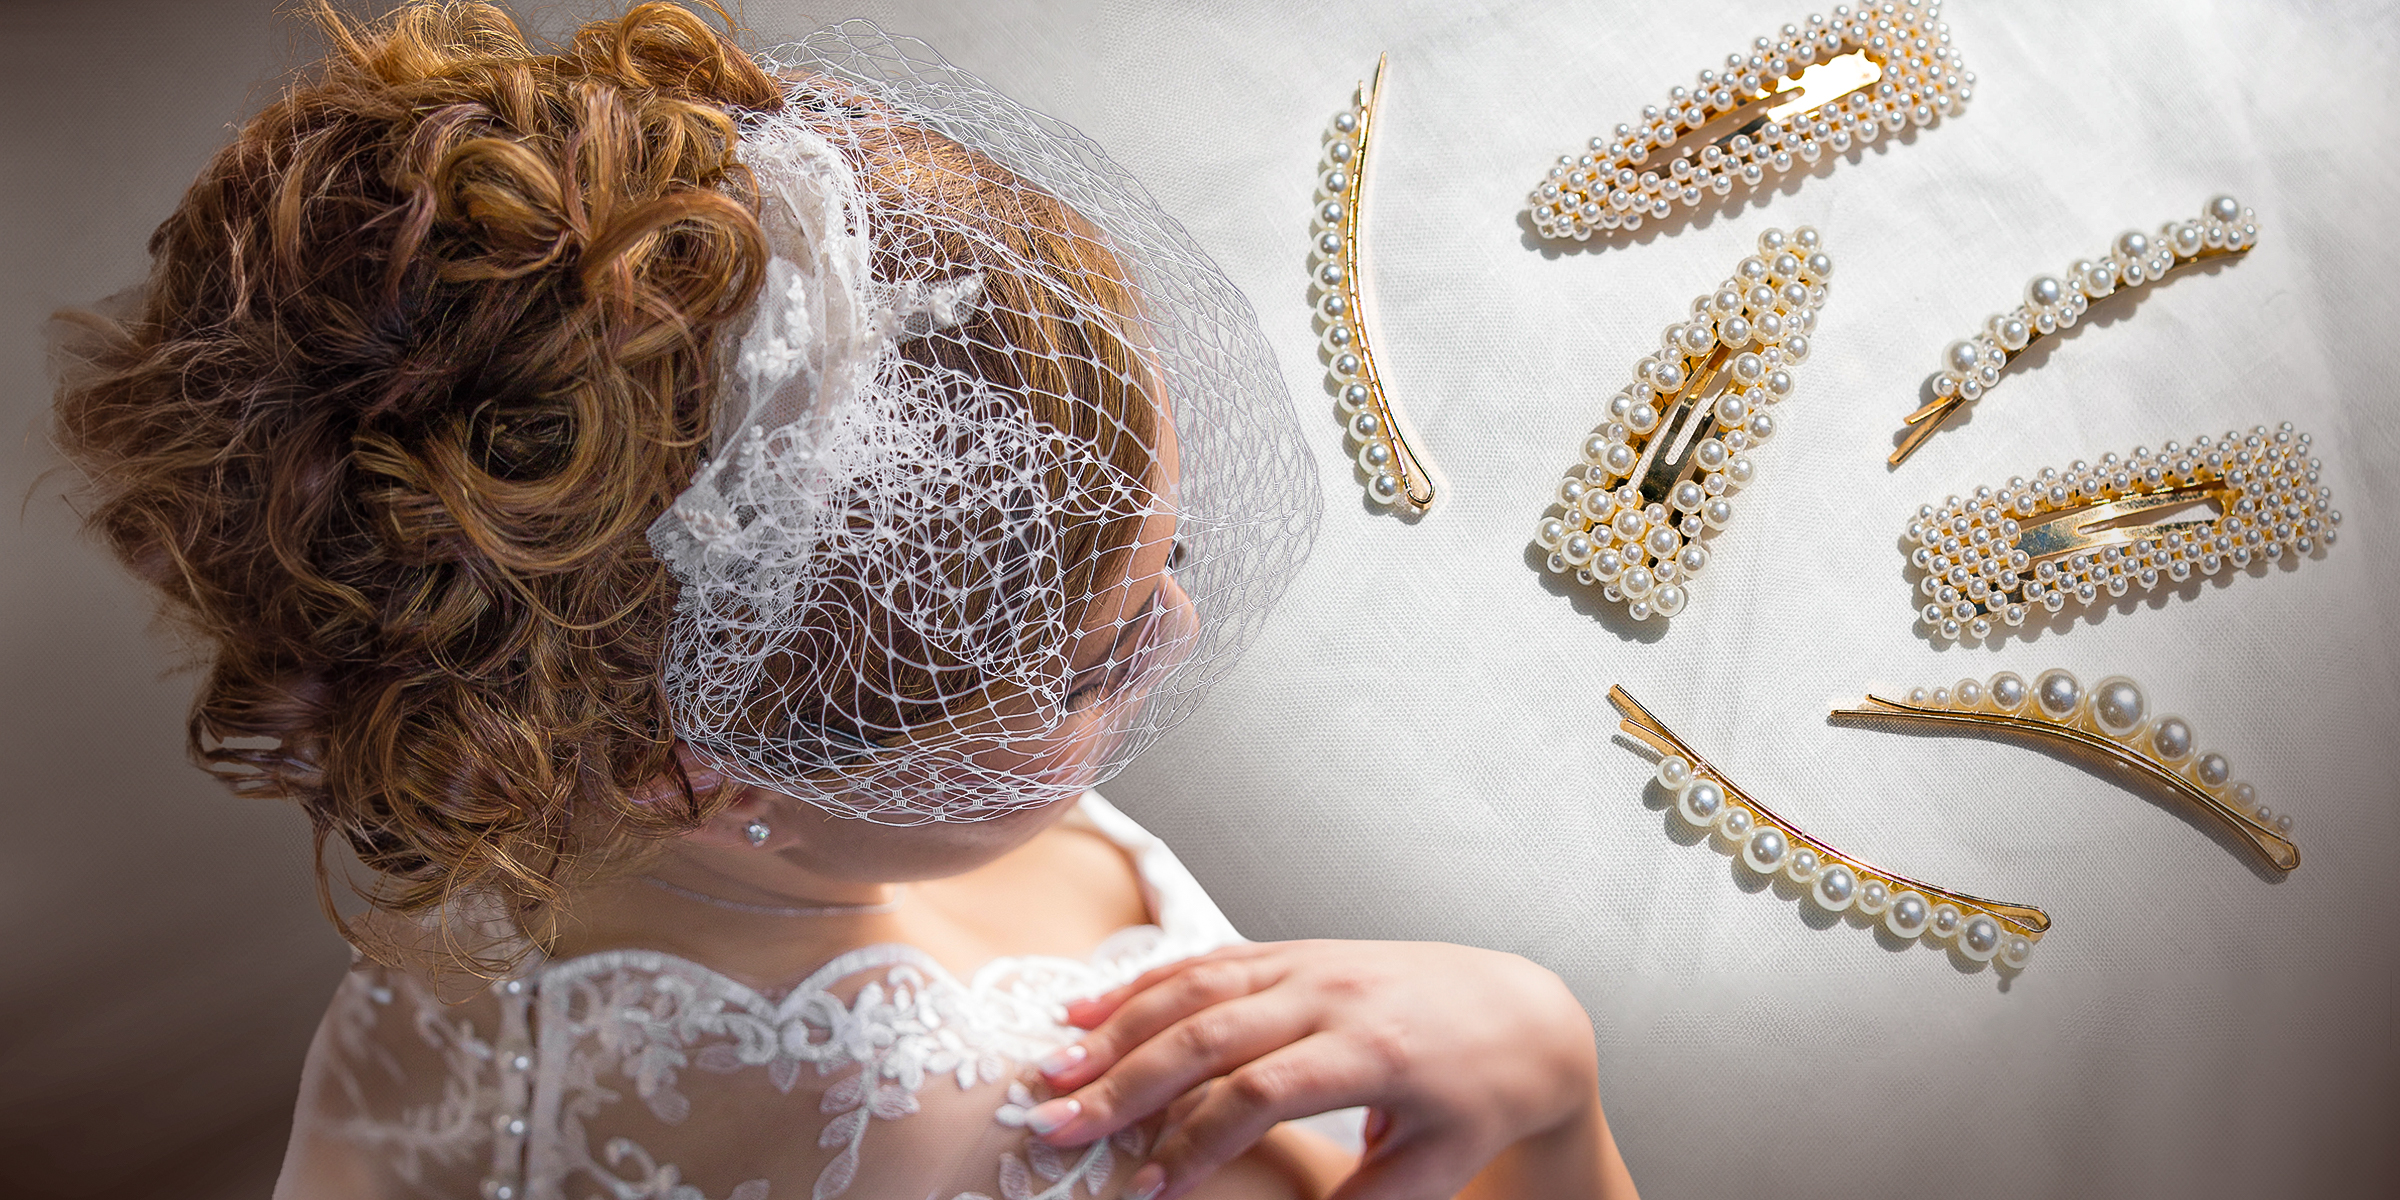 Hair accessories for the mother of the bride | Source: Shutterstock